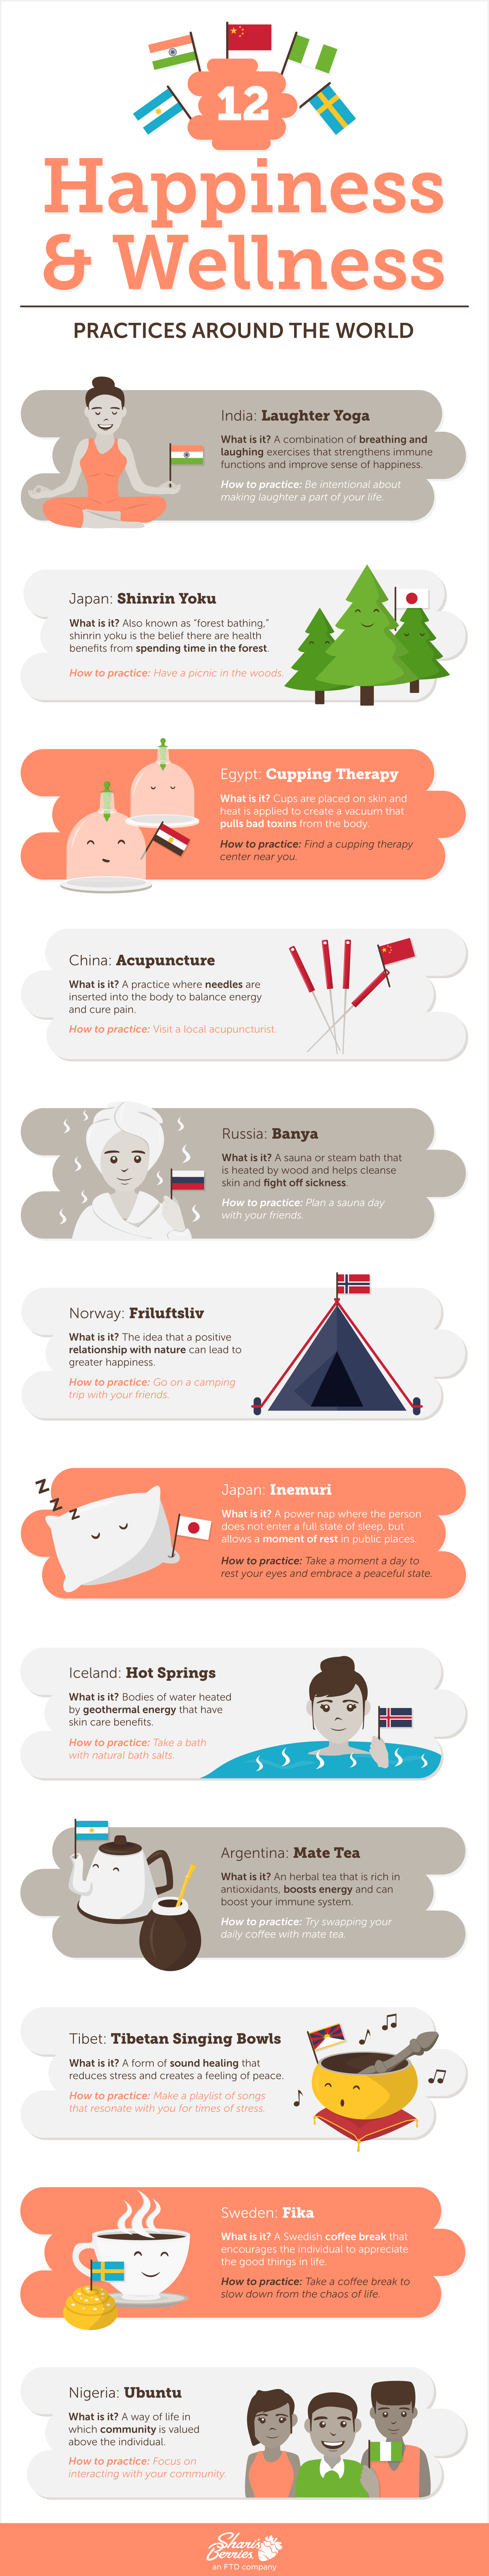 12 Happiness Techniques From Around The World That Can Change Your Life - infographic